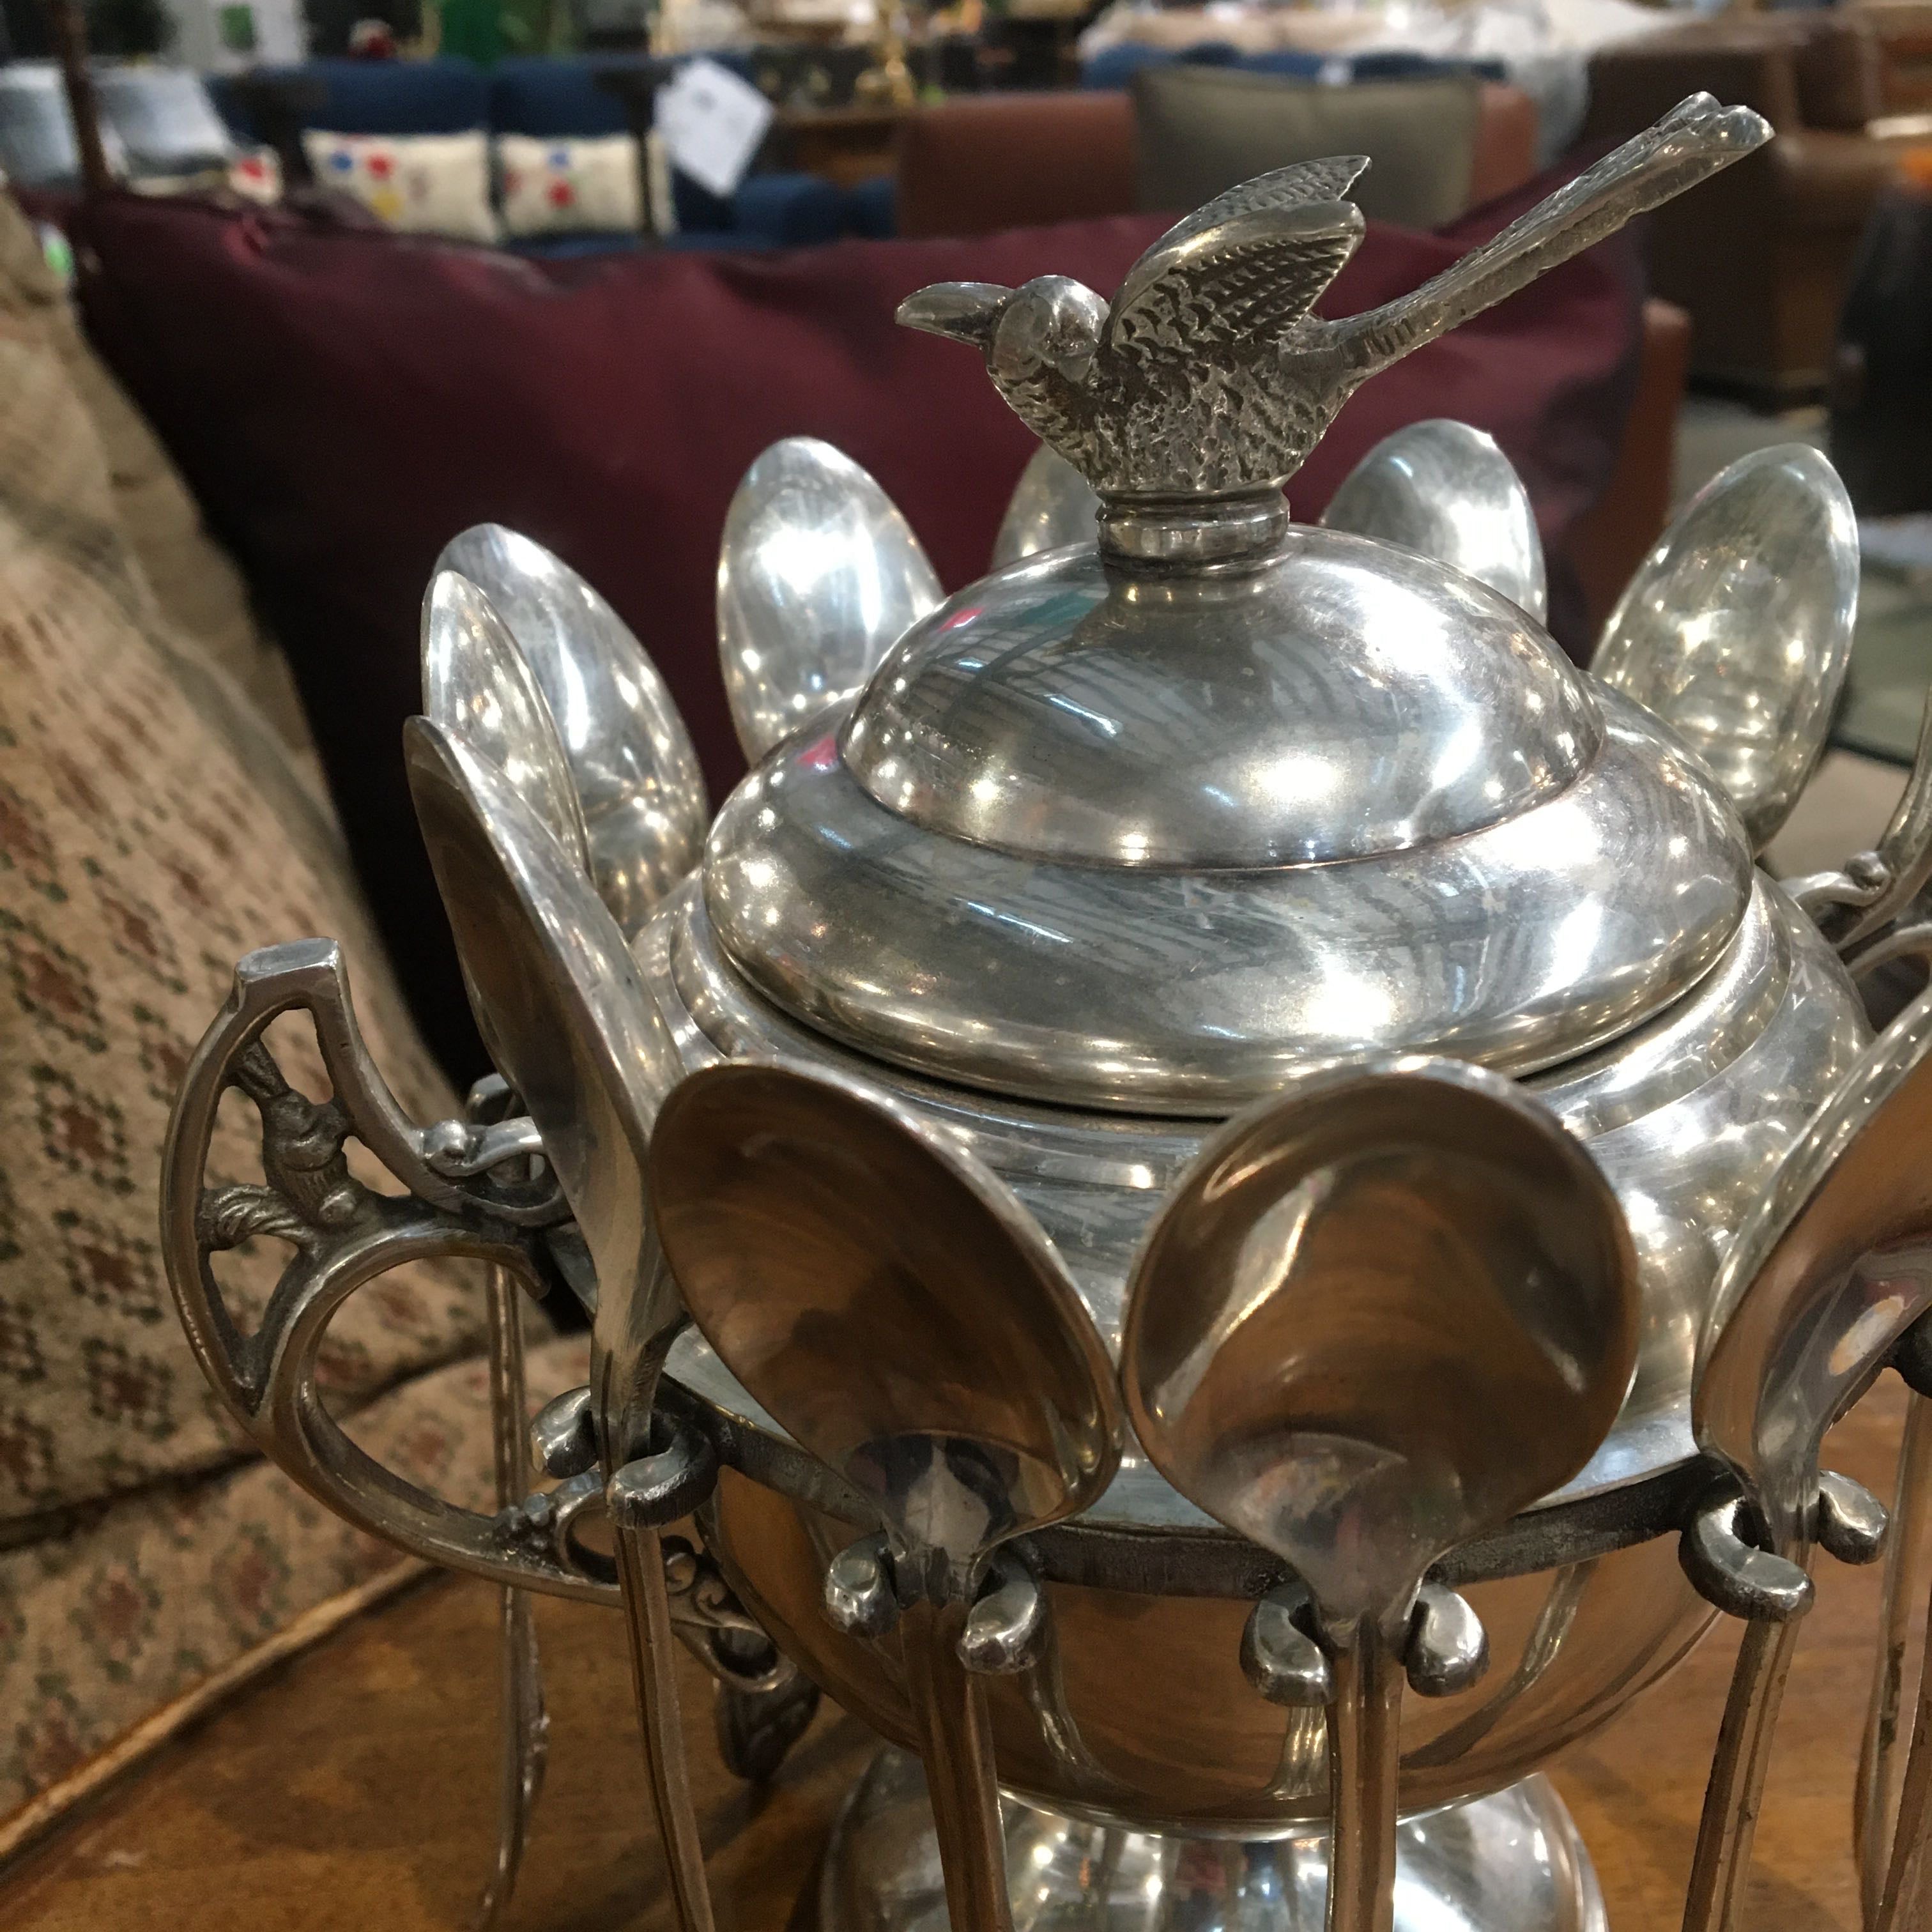 Antique Victorian Silver Plate Bird Tip Bunny Handles Spooner Sugar Bowl with 12 Spoons Kitchenware